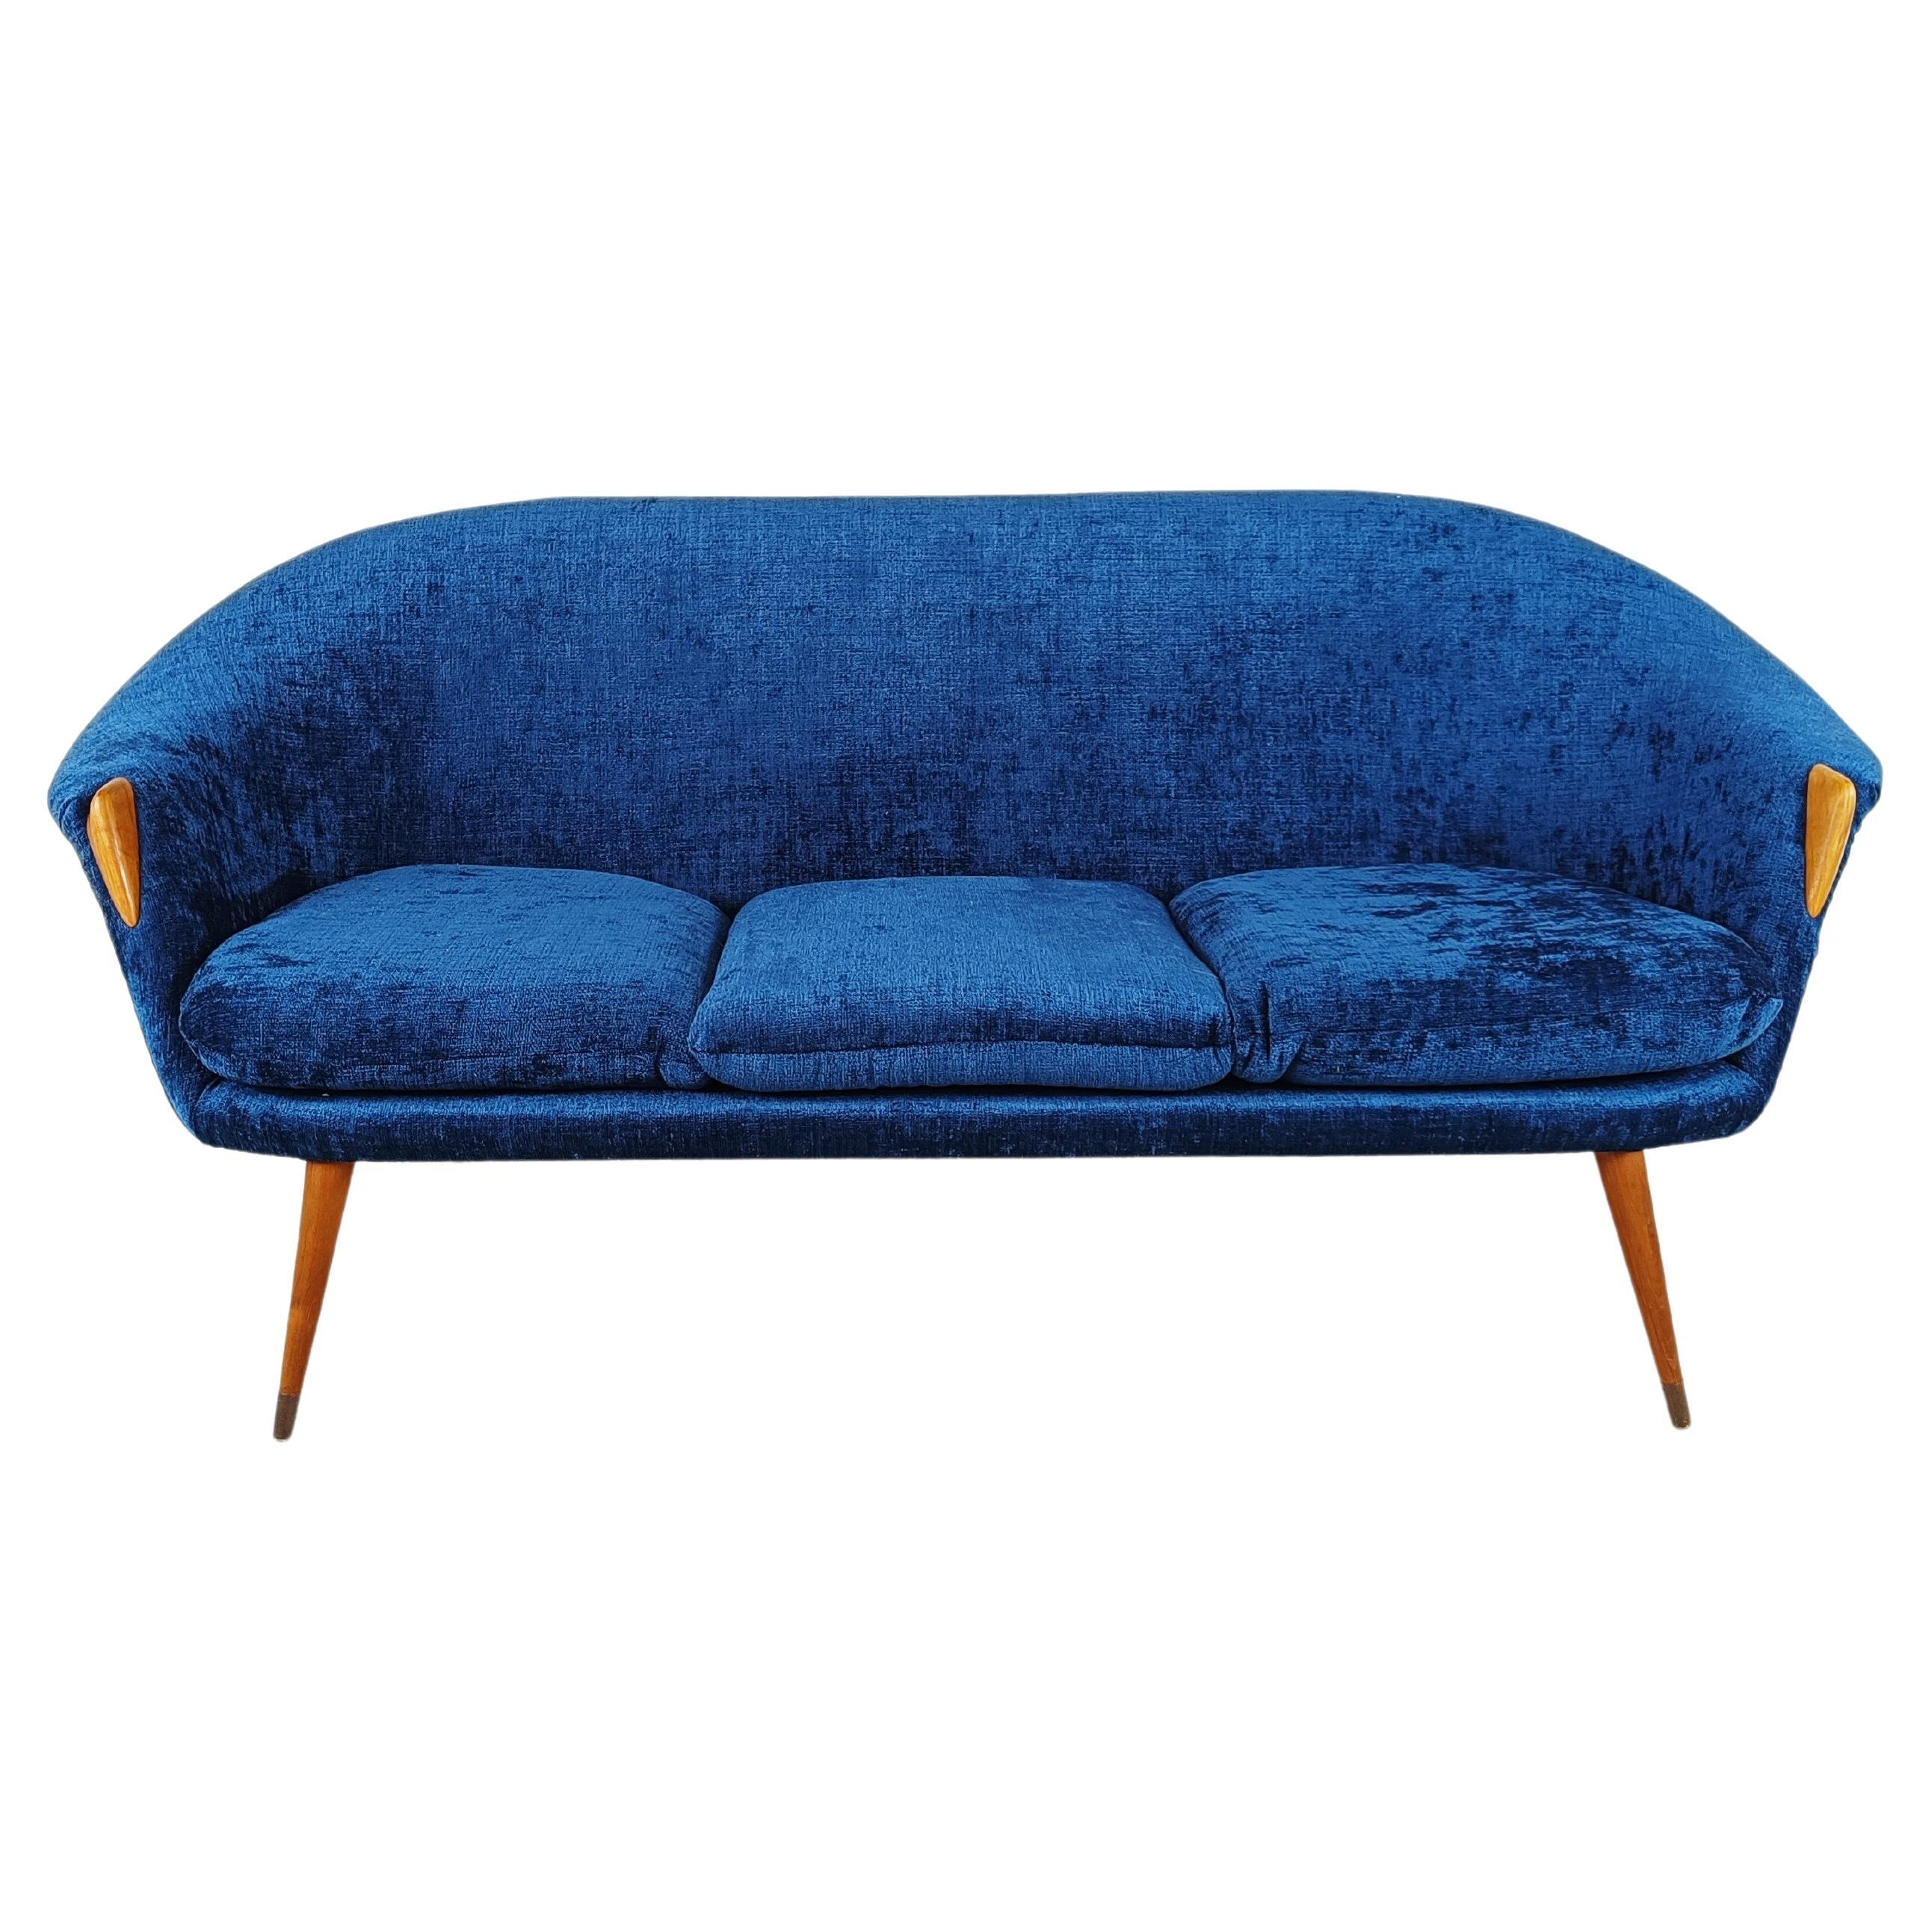 Midcentury Sofa Attributed to Nanna Ditzel, 1950s For Sale